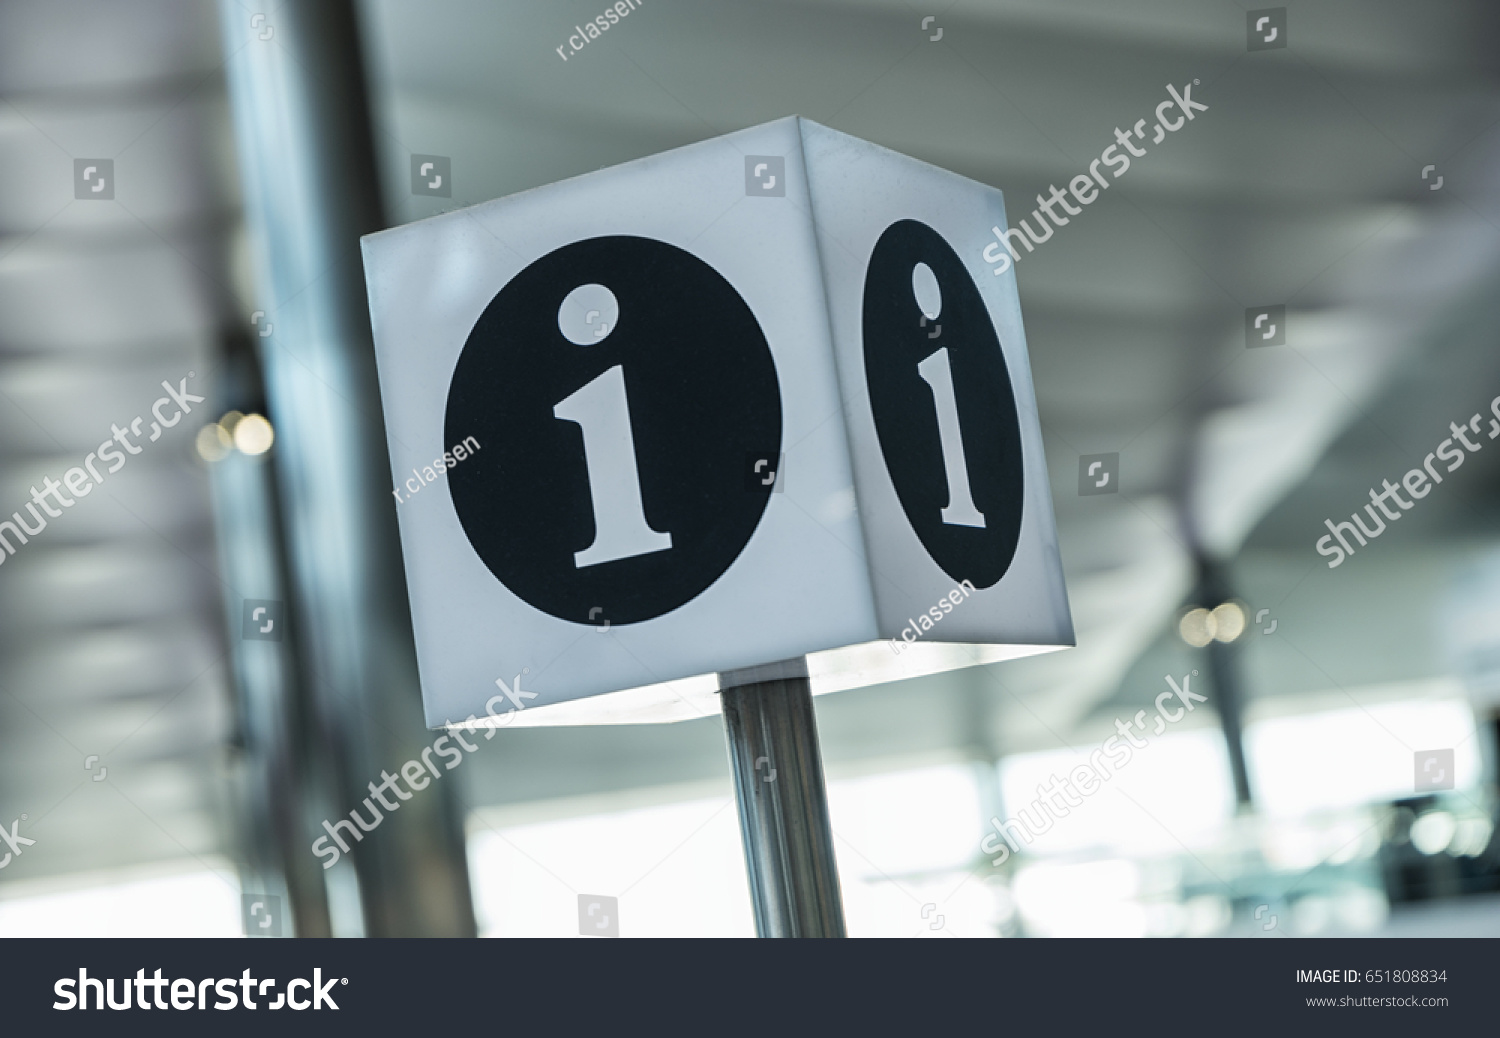 info point symbol on a airport #651808834